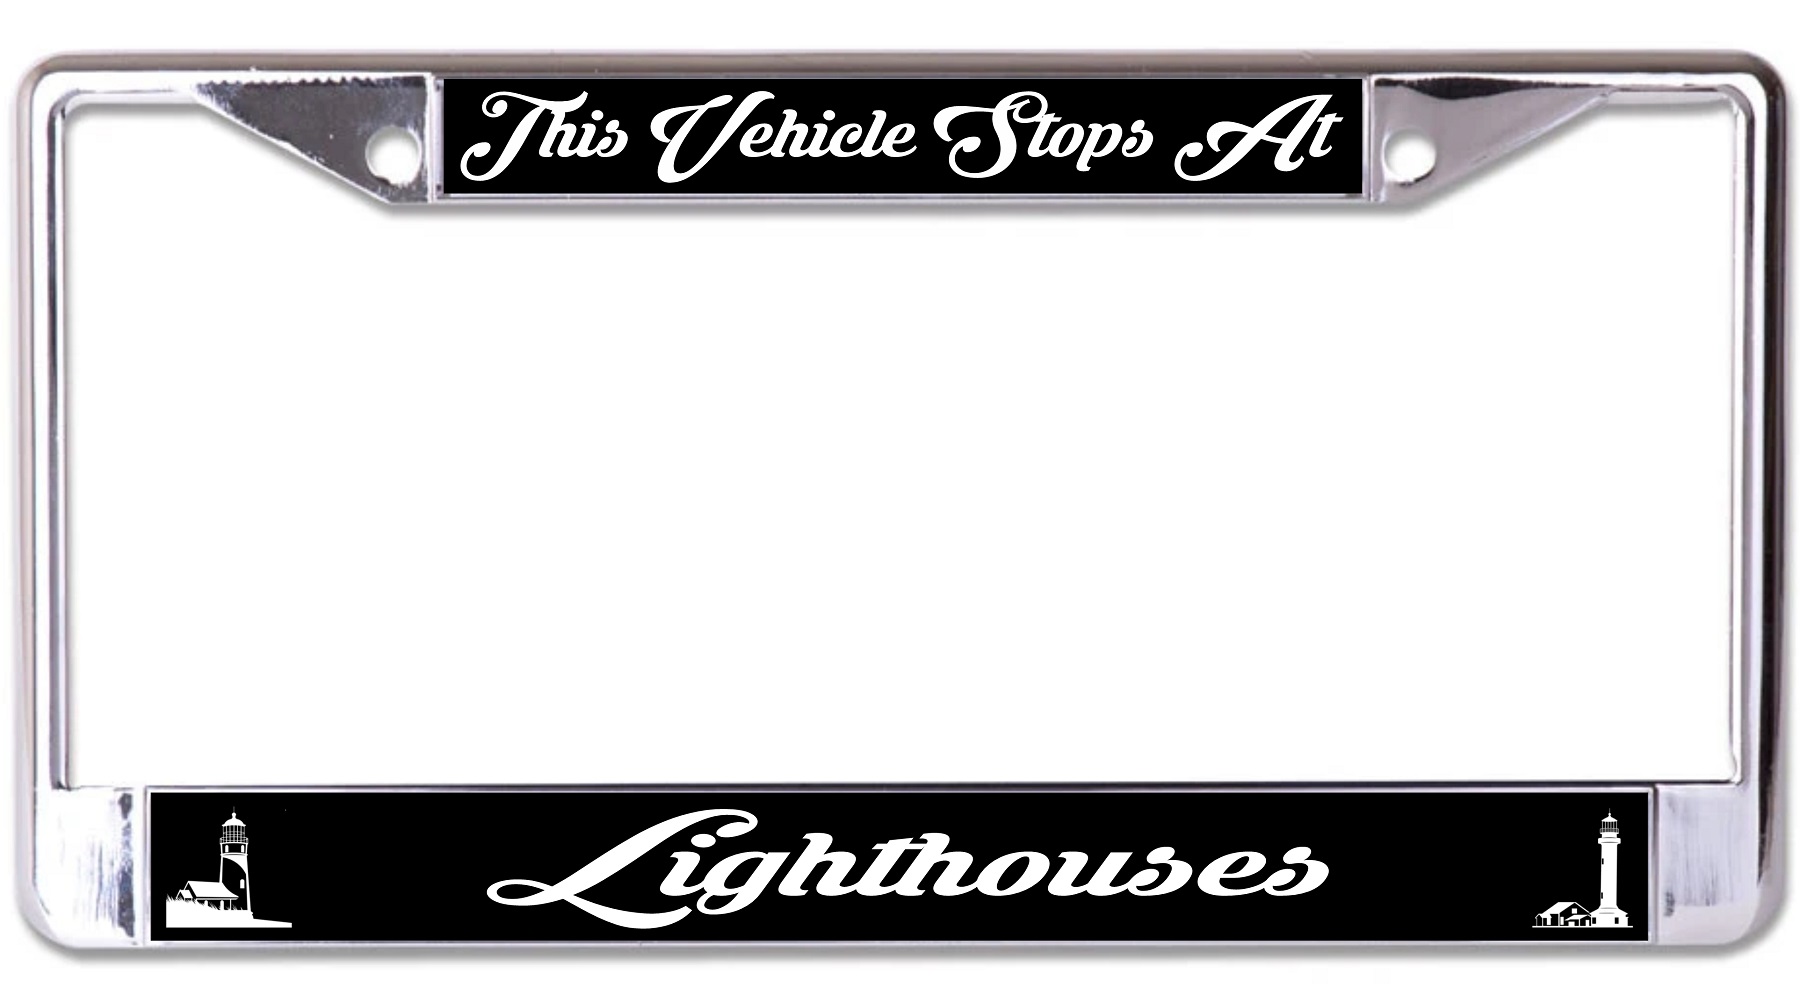 This Vehicle Stops At Lighthouses Chrome LICENSE PLATE Frame